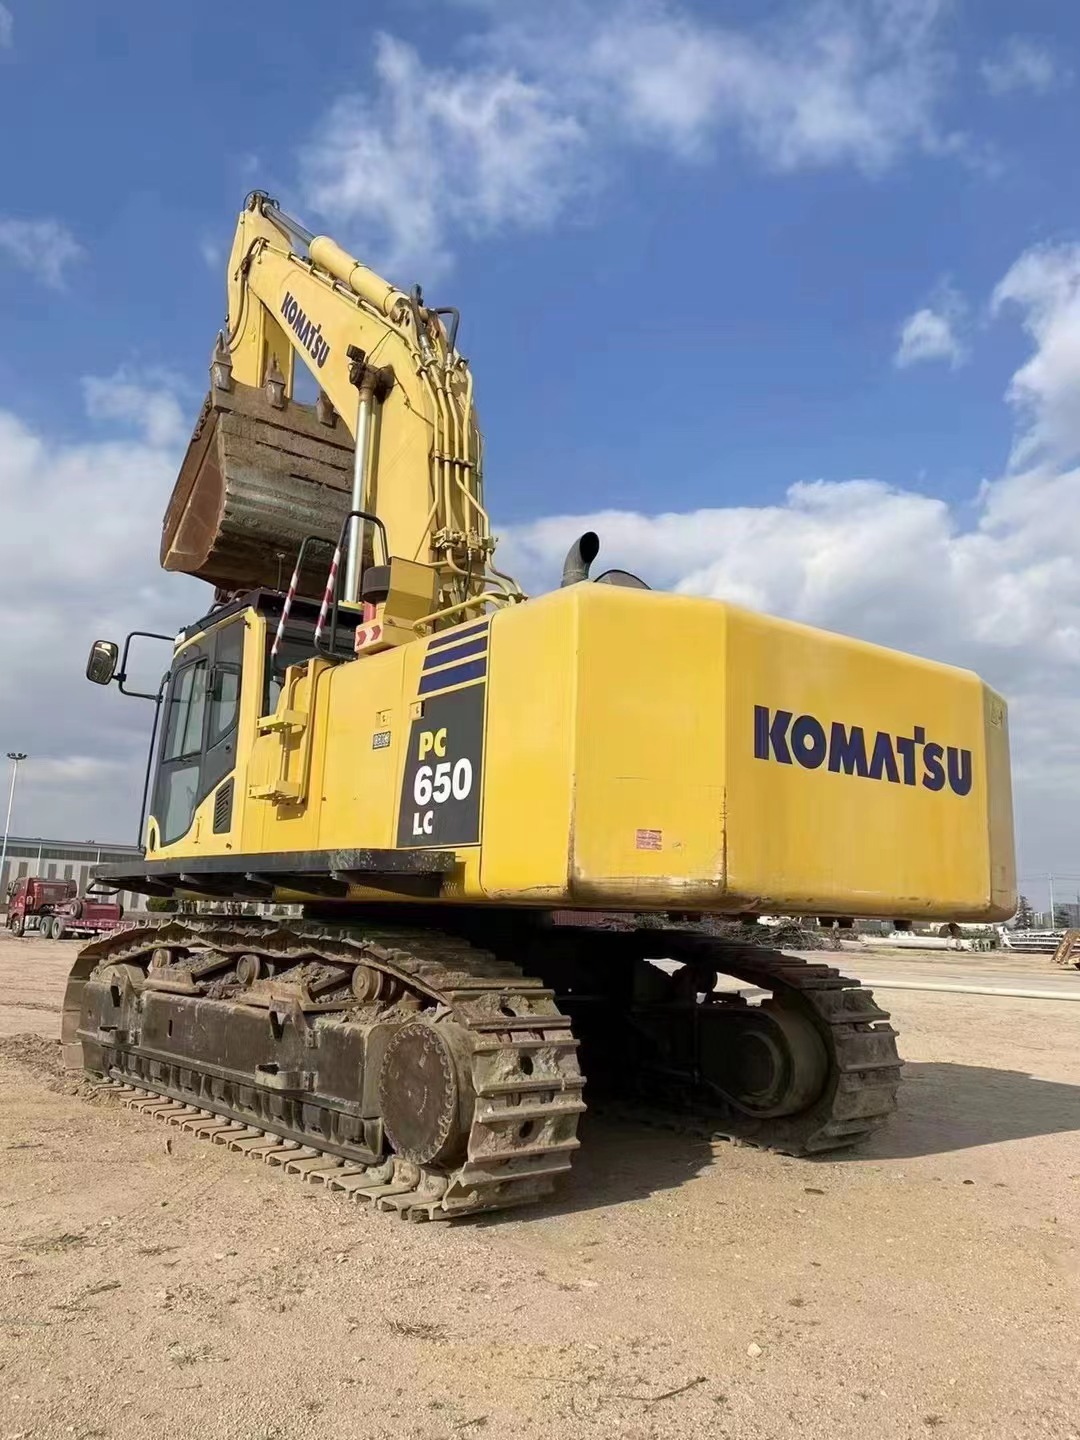 Japan imported 65 tons of second-hand excavator Komatsu PC650 original hydraulic excavator sold at a low price 10